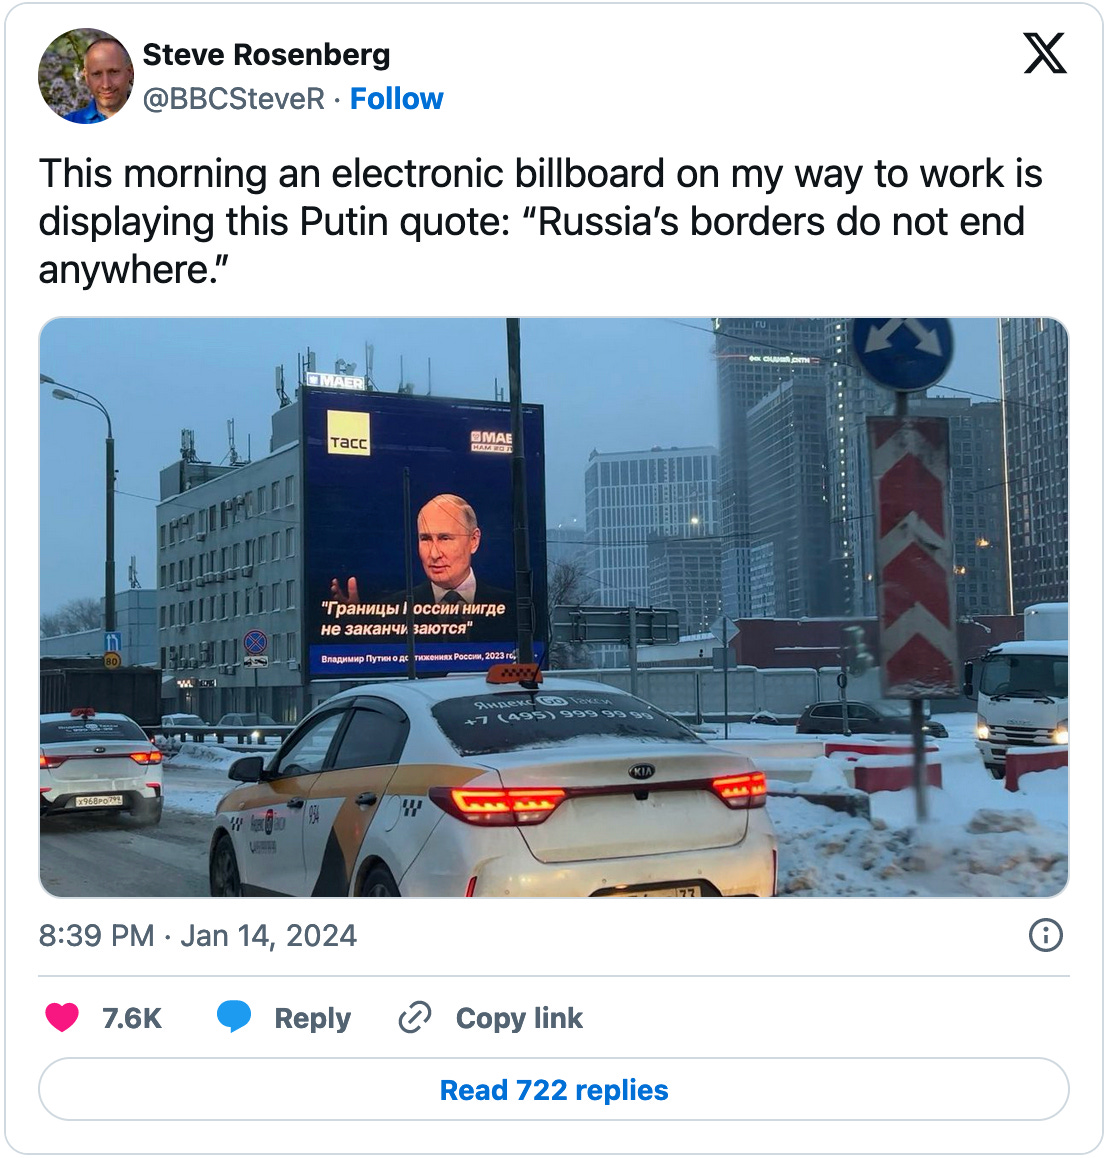 January 14, 2024 tweet from Steve Rosenberg reading, "This morning an electronic billboard on my way to work is displaying this Putin quote: “Russia’s borders do not end anywhere" with a picture of the billboard featuring Vladimir Putin's face alongside his words.